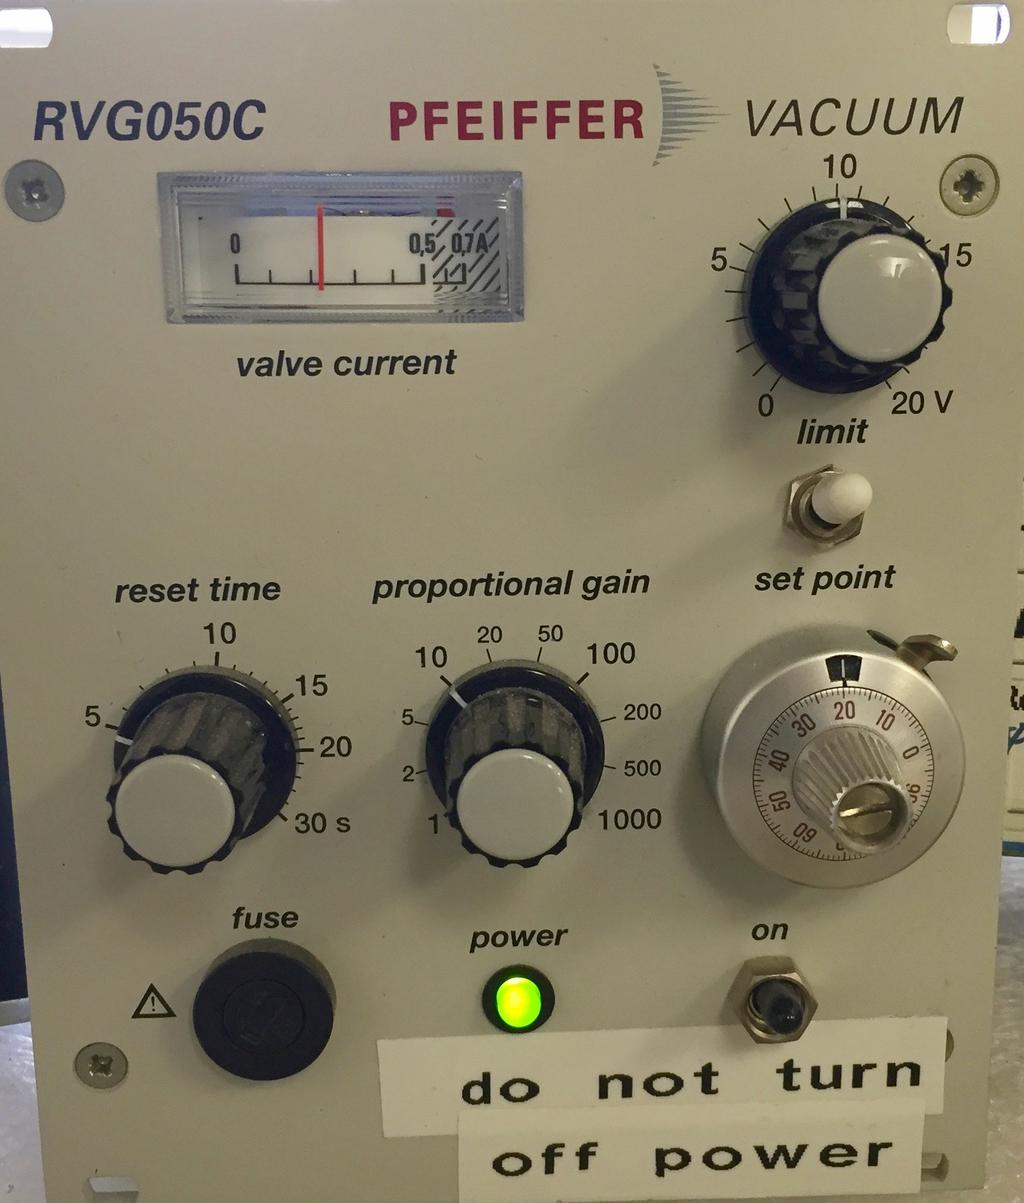 On Pfeiffer RVG050 (FIG 7) box near computer monitor, toggle white switch to Set Point.